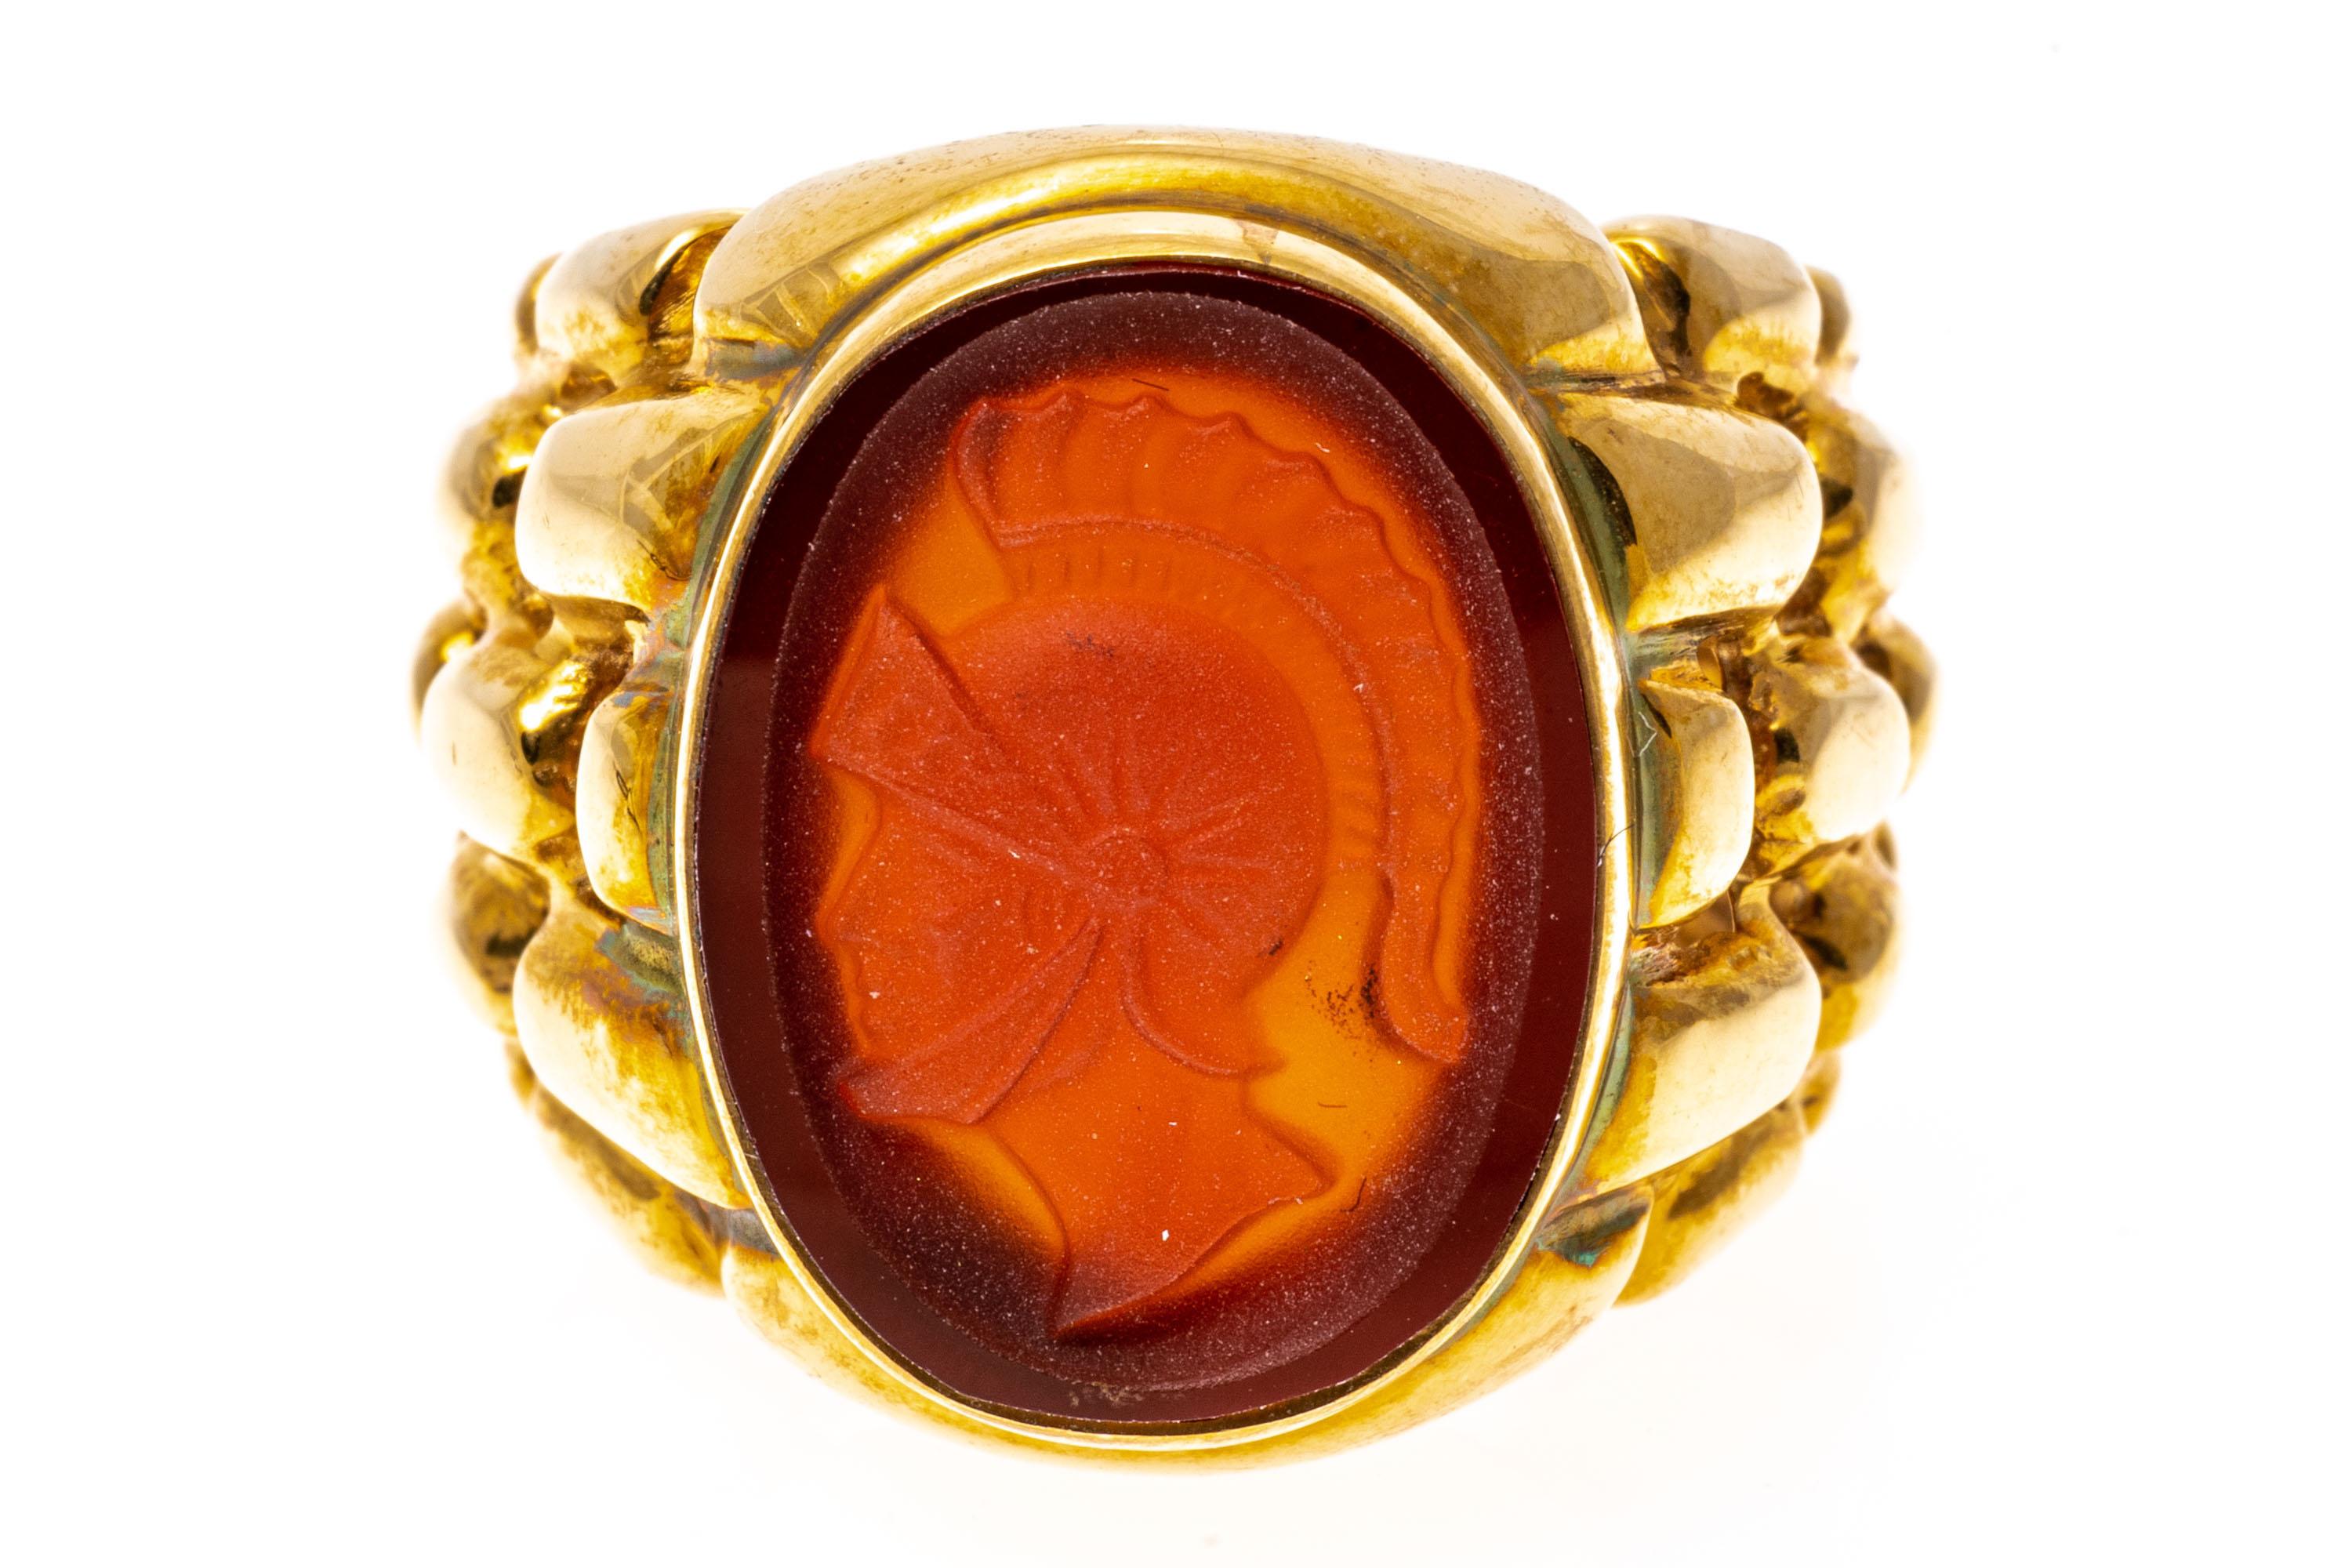 14k yellow gold ring. This gorgeous contemporary oval laser cut cameo ring has a dark orange carnelian background with a lighter orange foreground of a handsome bust of a soldier, facing to the left. The ring is also a signet profile, adorned with